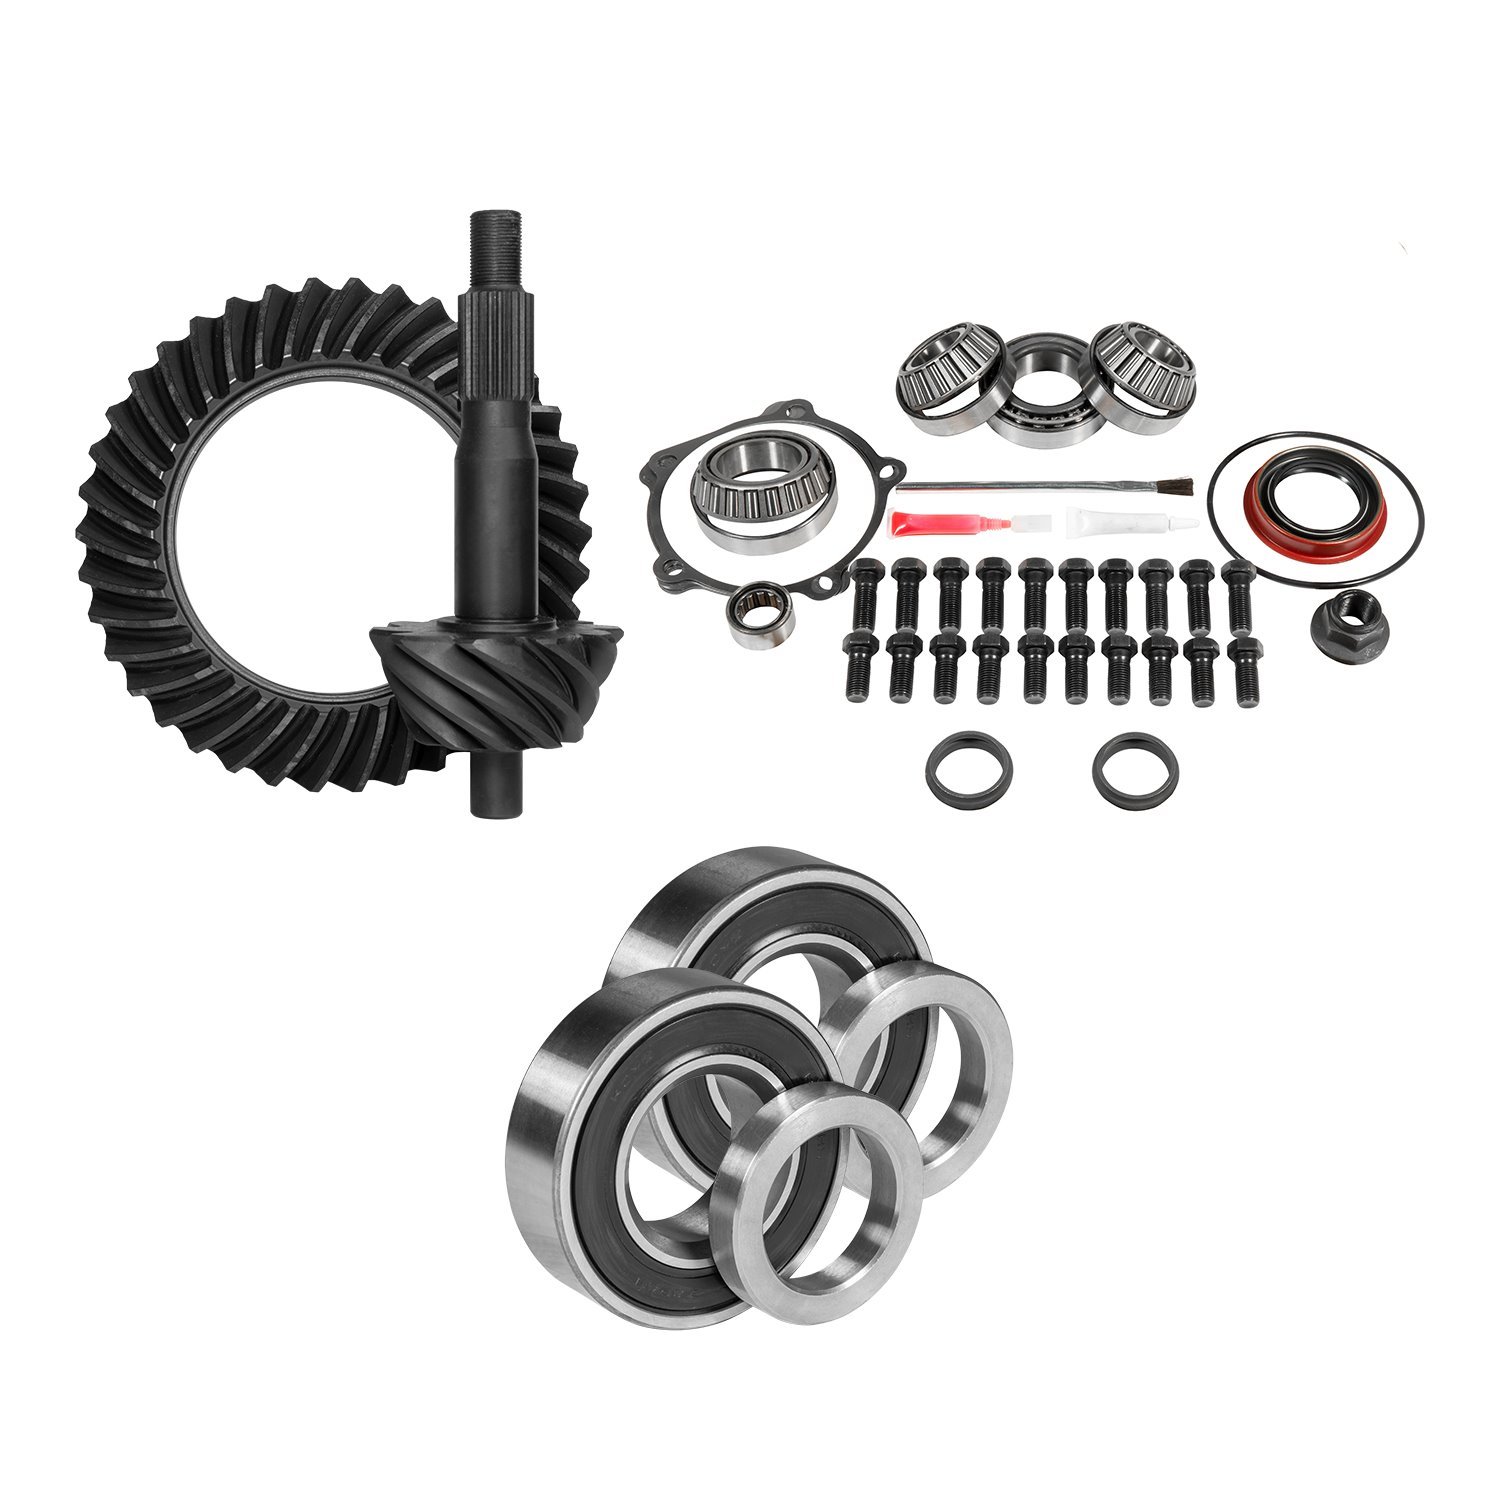 Muscle Car Re-Gear Kit For Ford 8 in. Differential, 25 Spline, 3.80 Ratio